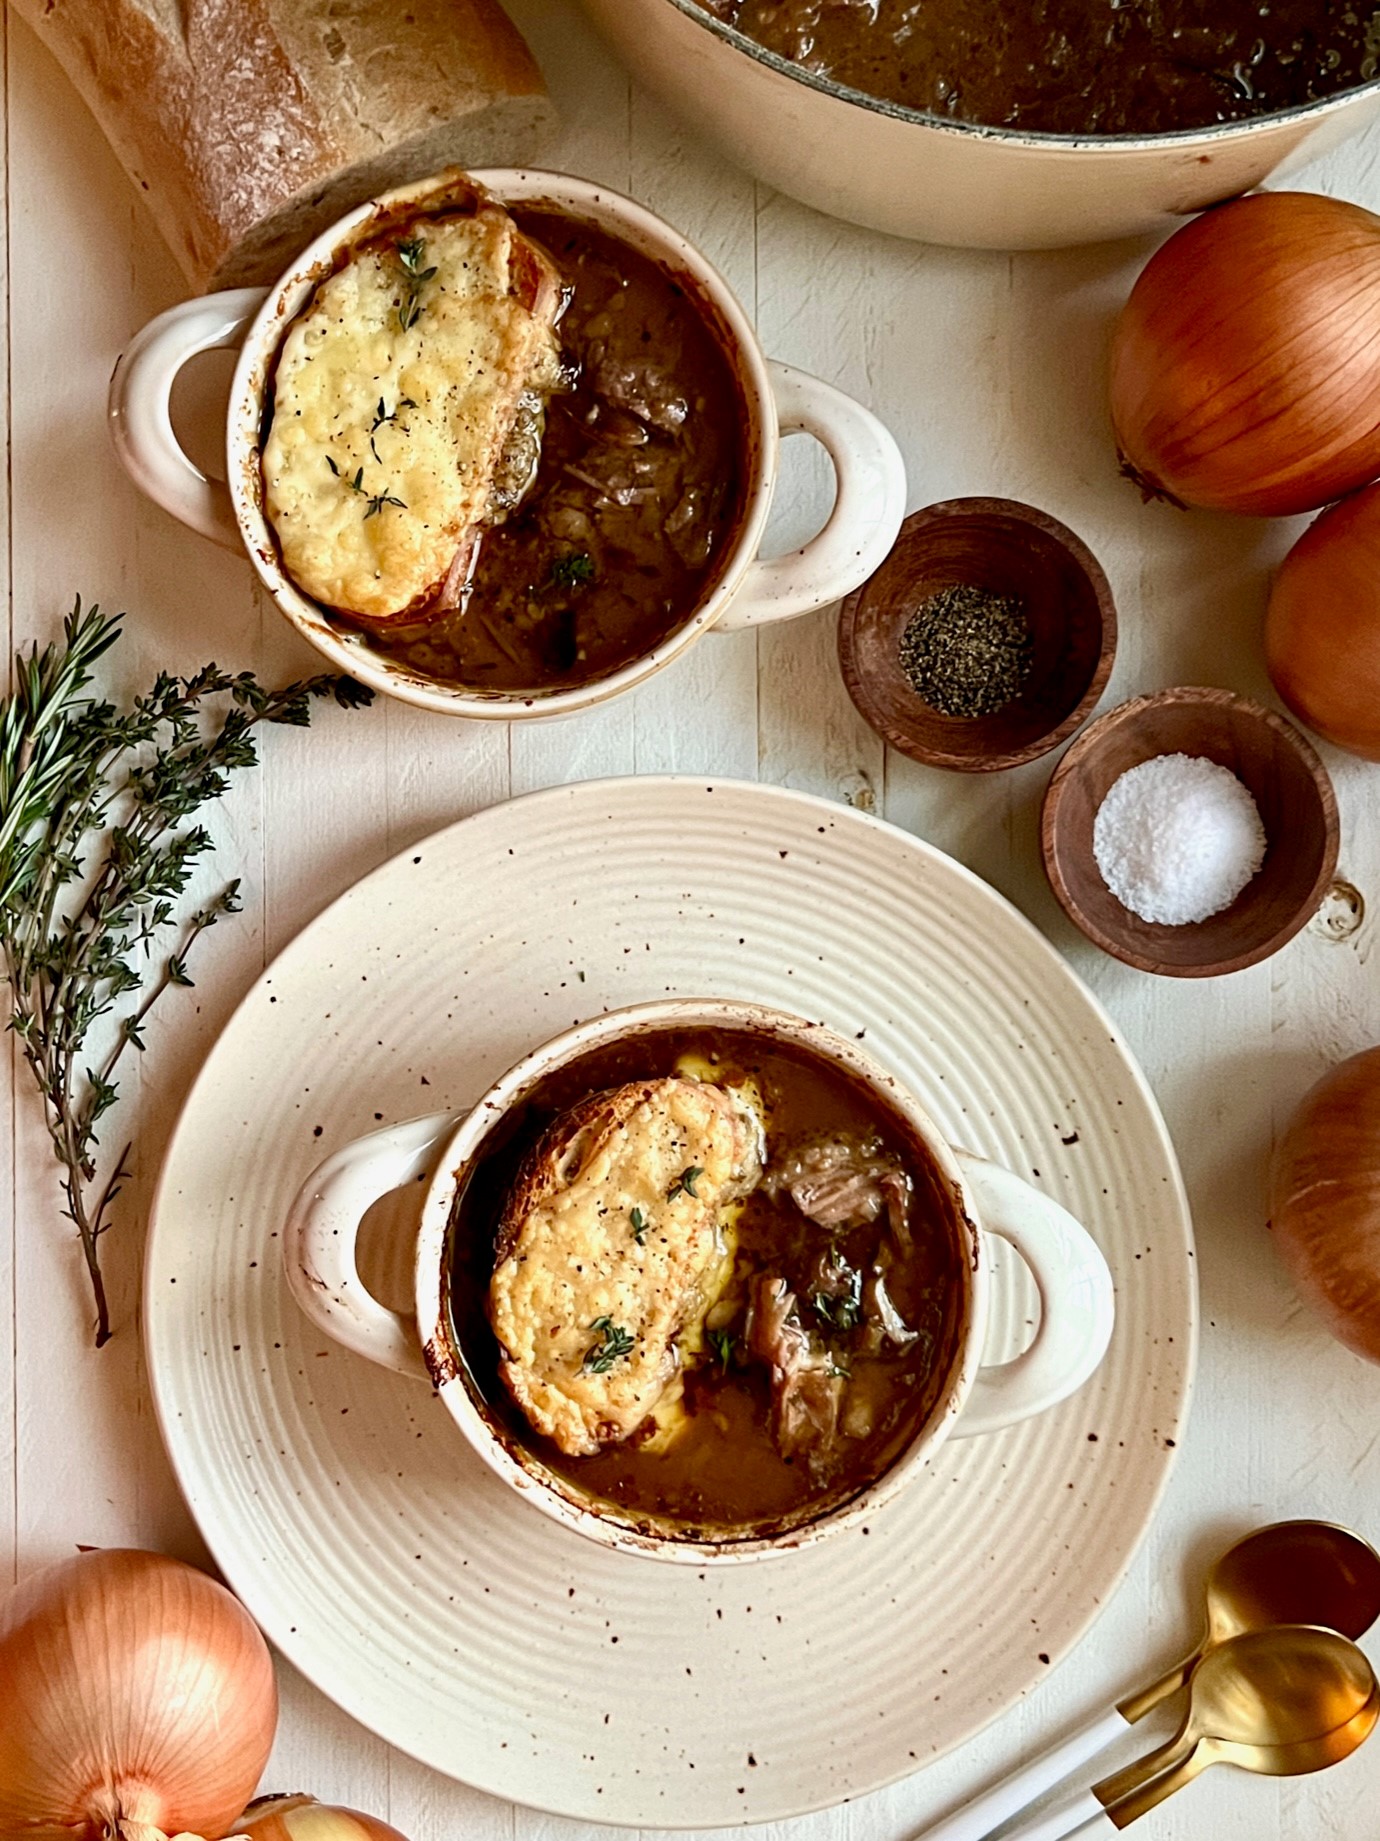 French Onion & Mushroom Stew with Slow Braised Short Ribs